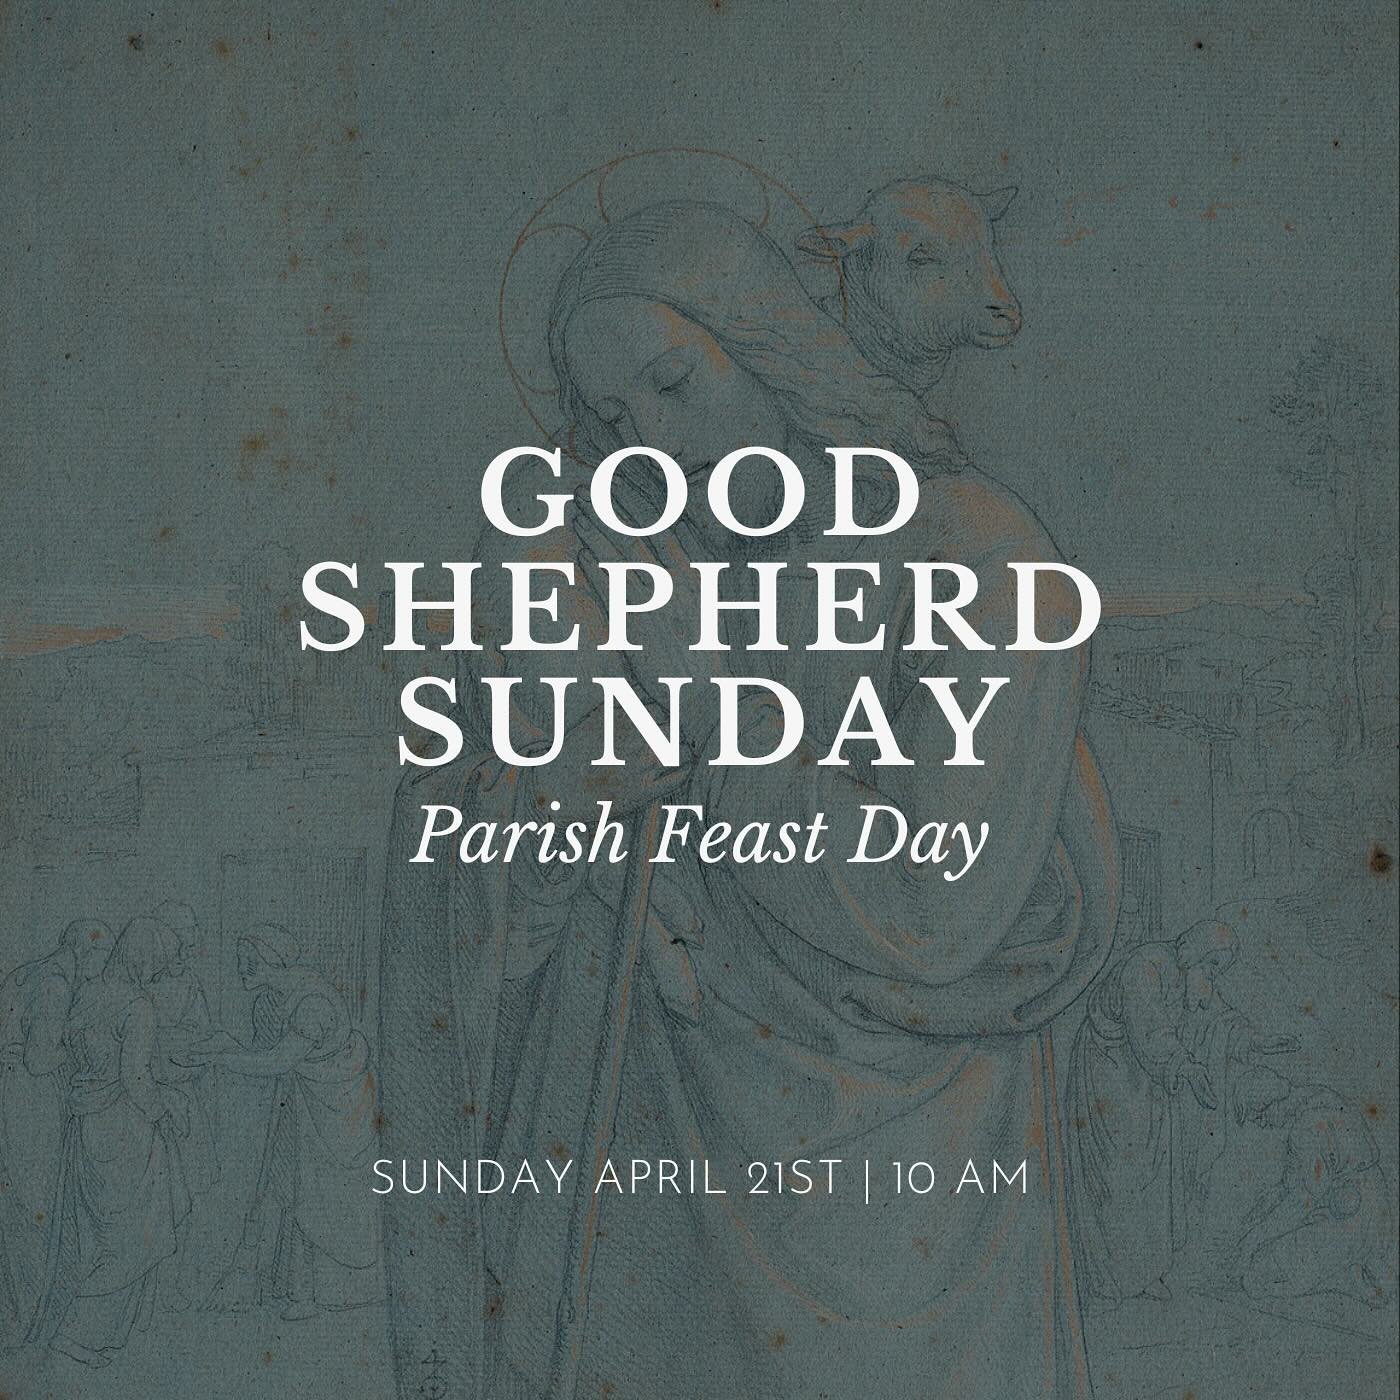 Join us for Good Shepherd Sunday, our parish feast day on Sunday, April 21st at 10 AM! In addition to Good Shepherd Sunday, we will also be honoring the Wallace Family for their service and dedication to our parish over these last few years. We will 